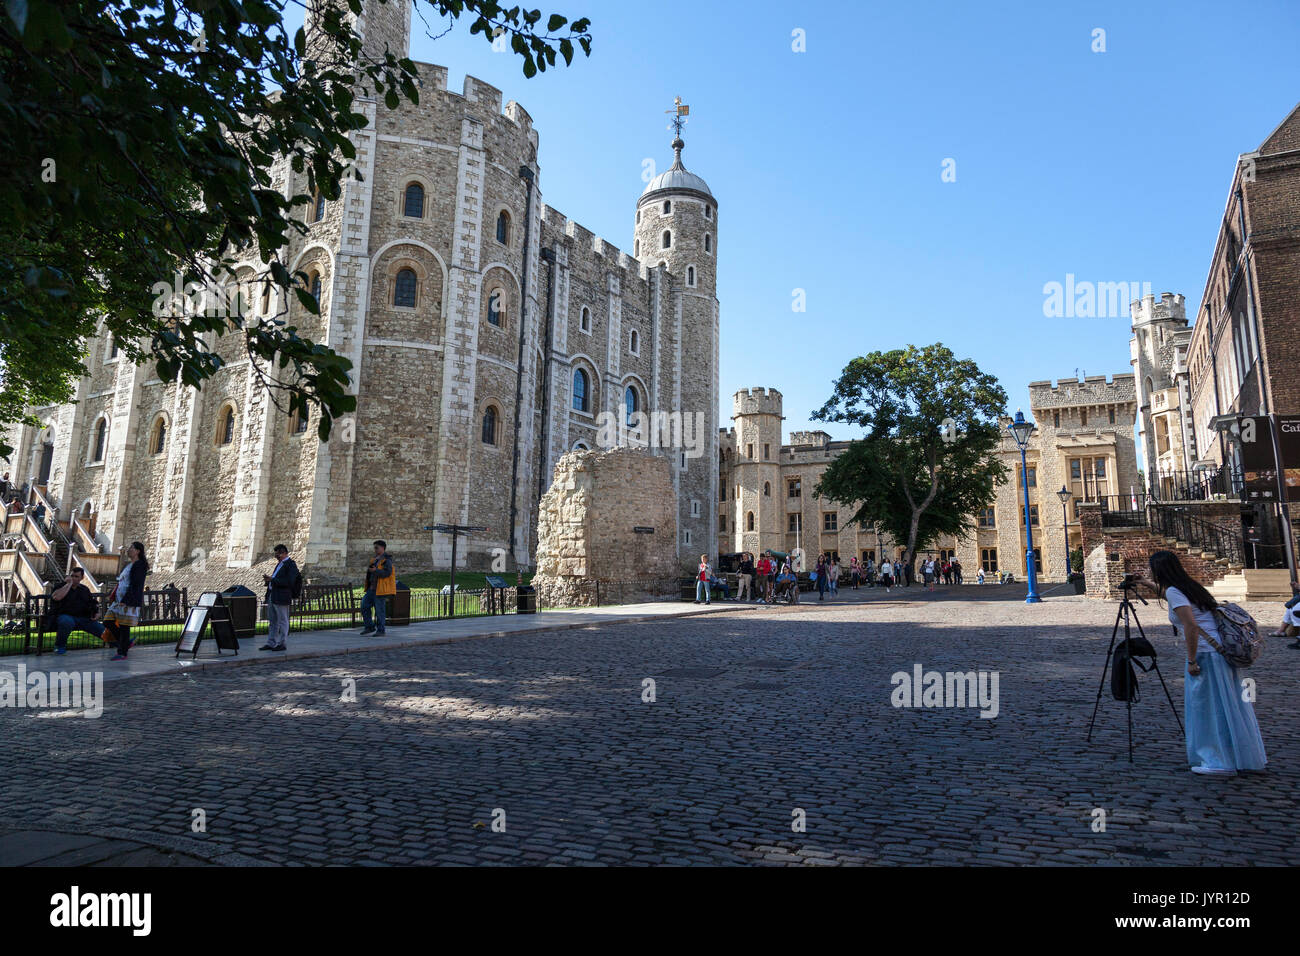 Scenes from The Tower of London, England Stock Photo